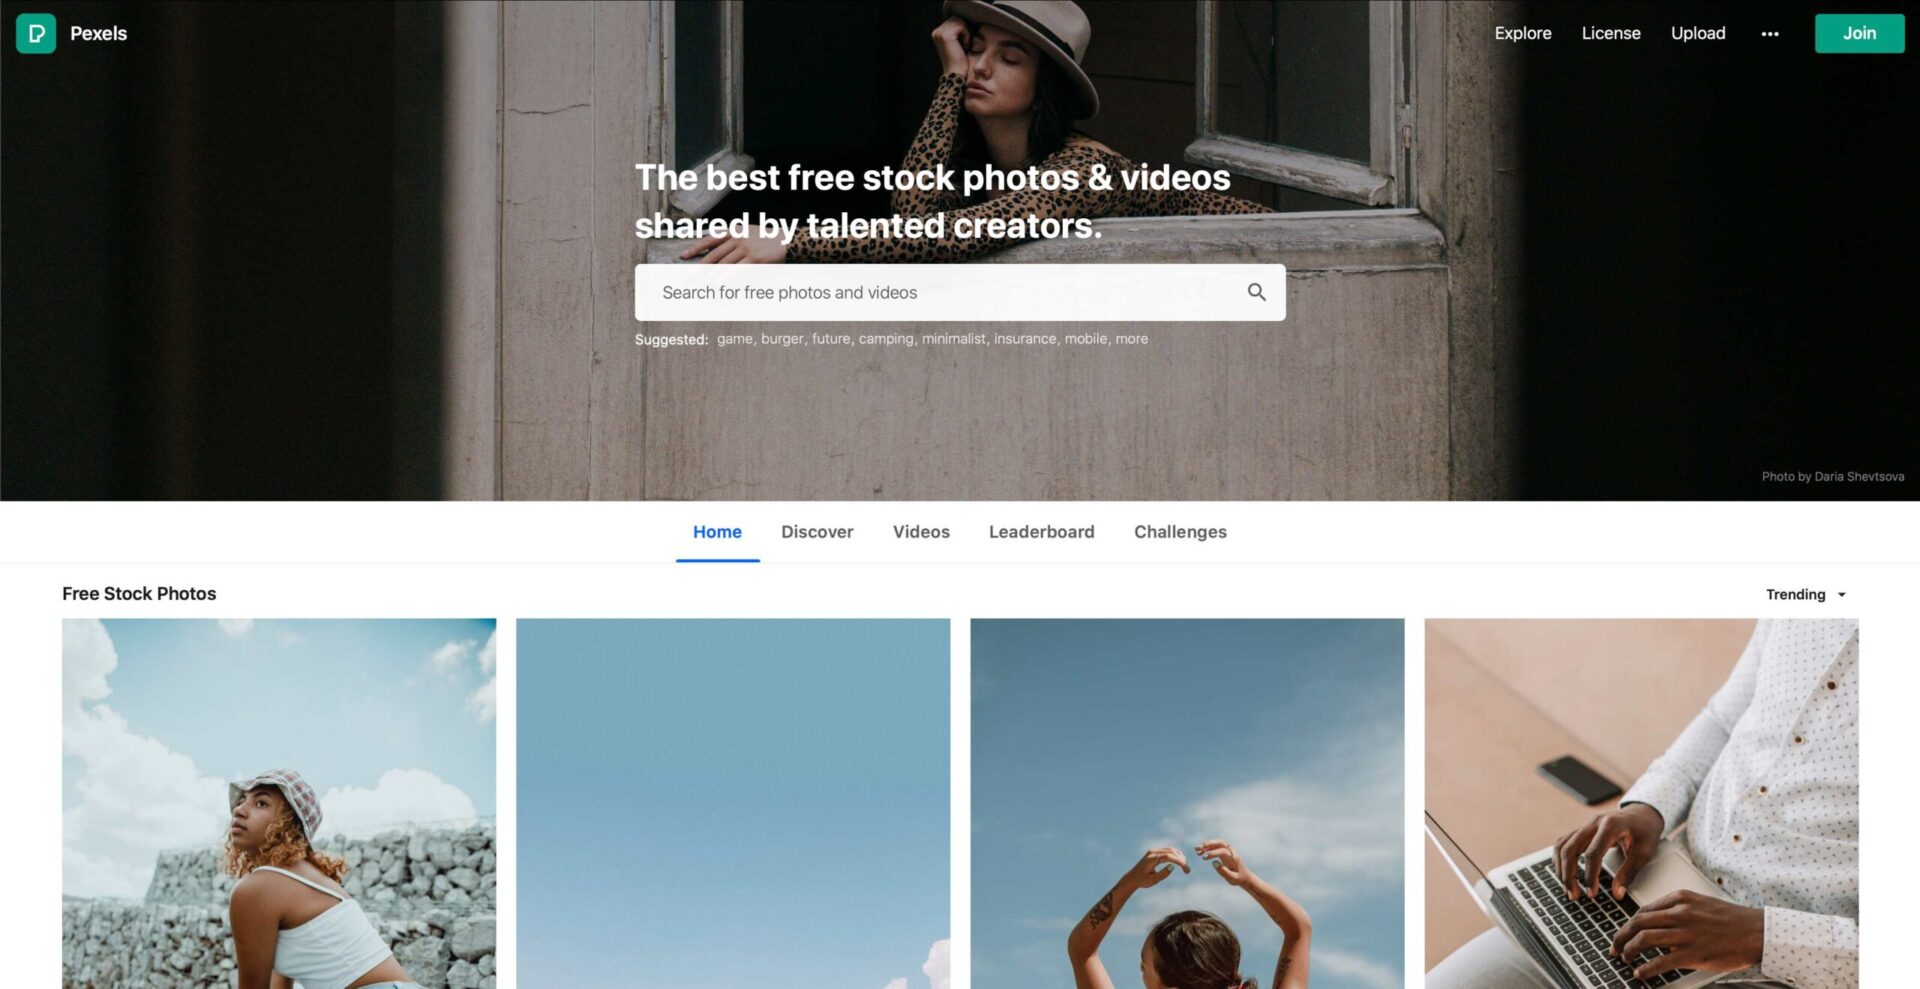 15 Free Stock Photography Websites You Should Be Using For Your Next Project - 09 Free Stock Websites pexels scaled 1